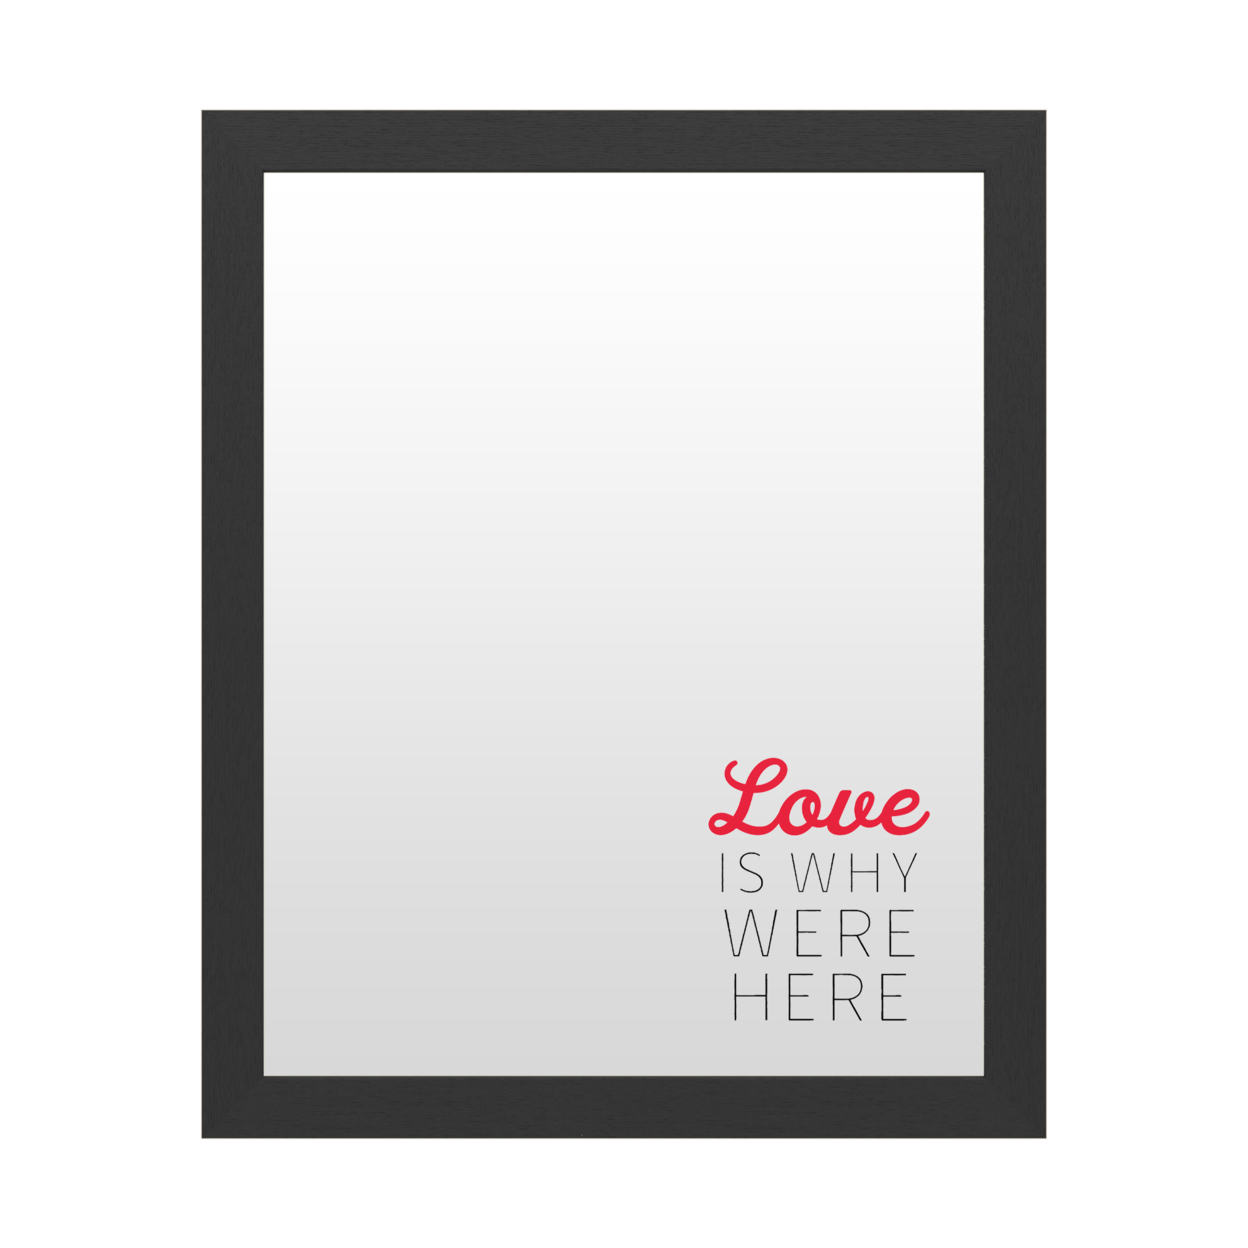 Dry Erase 16 X 20 Marker Board With Printed Artwork - Love Is Why Were Here White Board - Ready To Hang